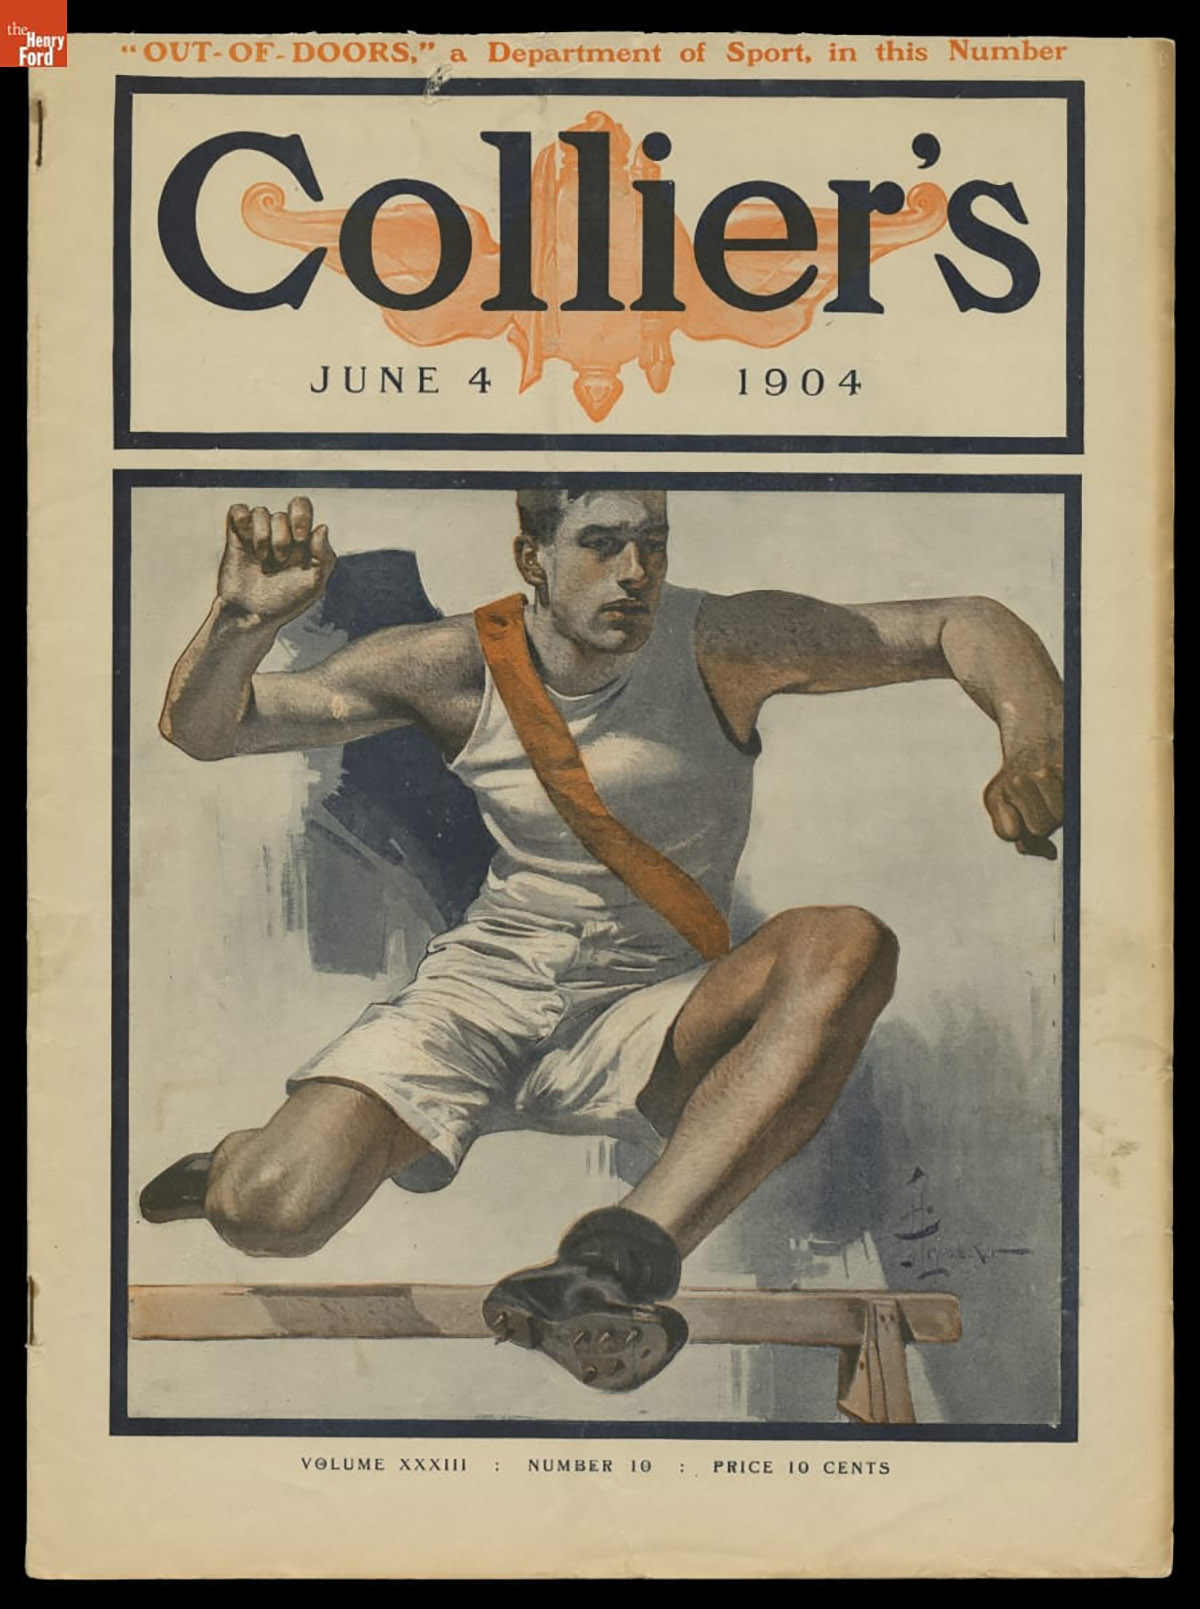 Leyendecker’s cover for the June 4, 1904, issue of Collier’s illustrated the first of a series highlighting outdoor sports and leisure.